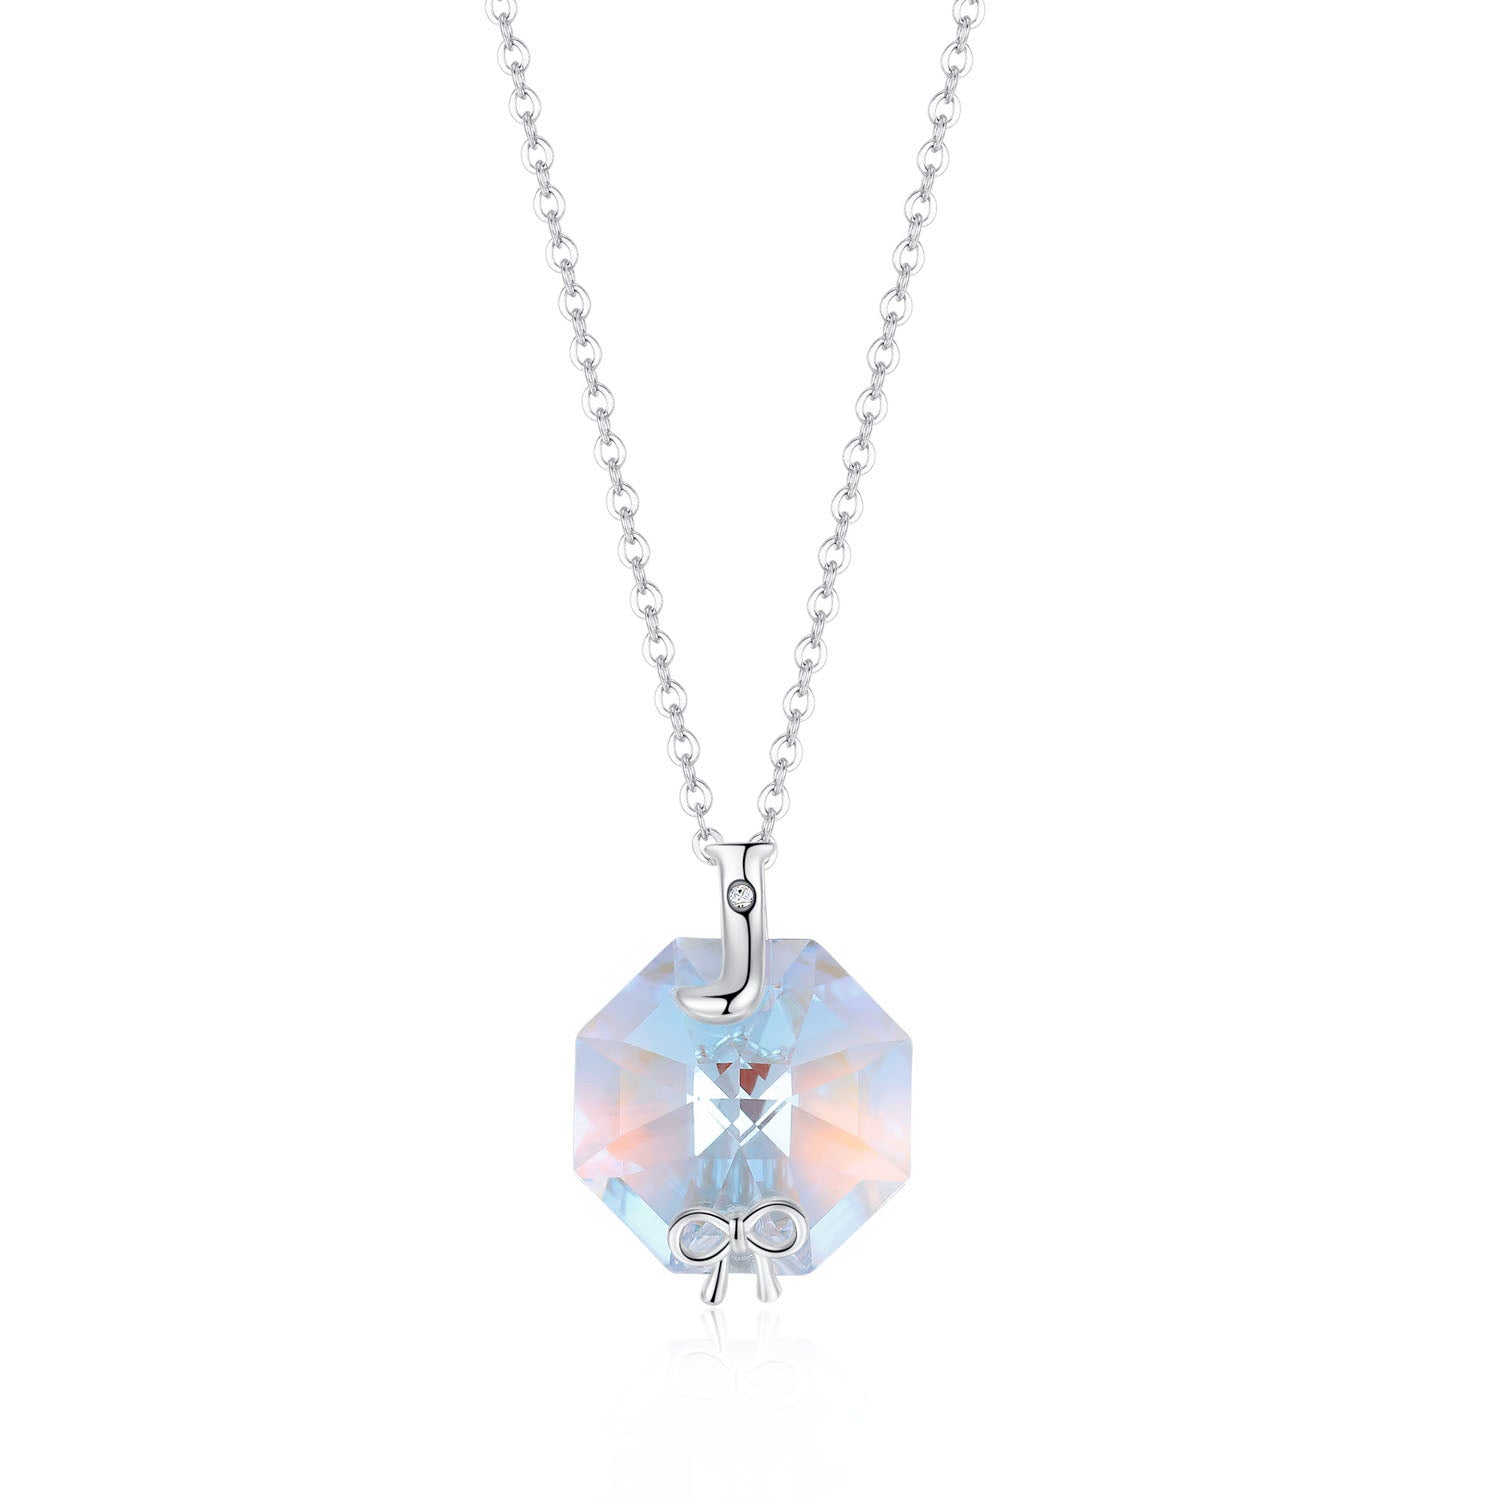 Planet J 925 Sterling Silver Hexagon Small Bow Pendant Necklace with Swarovski Elements Crystals